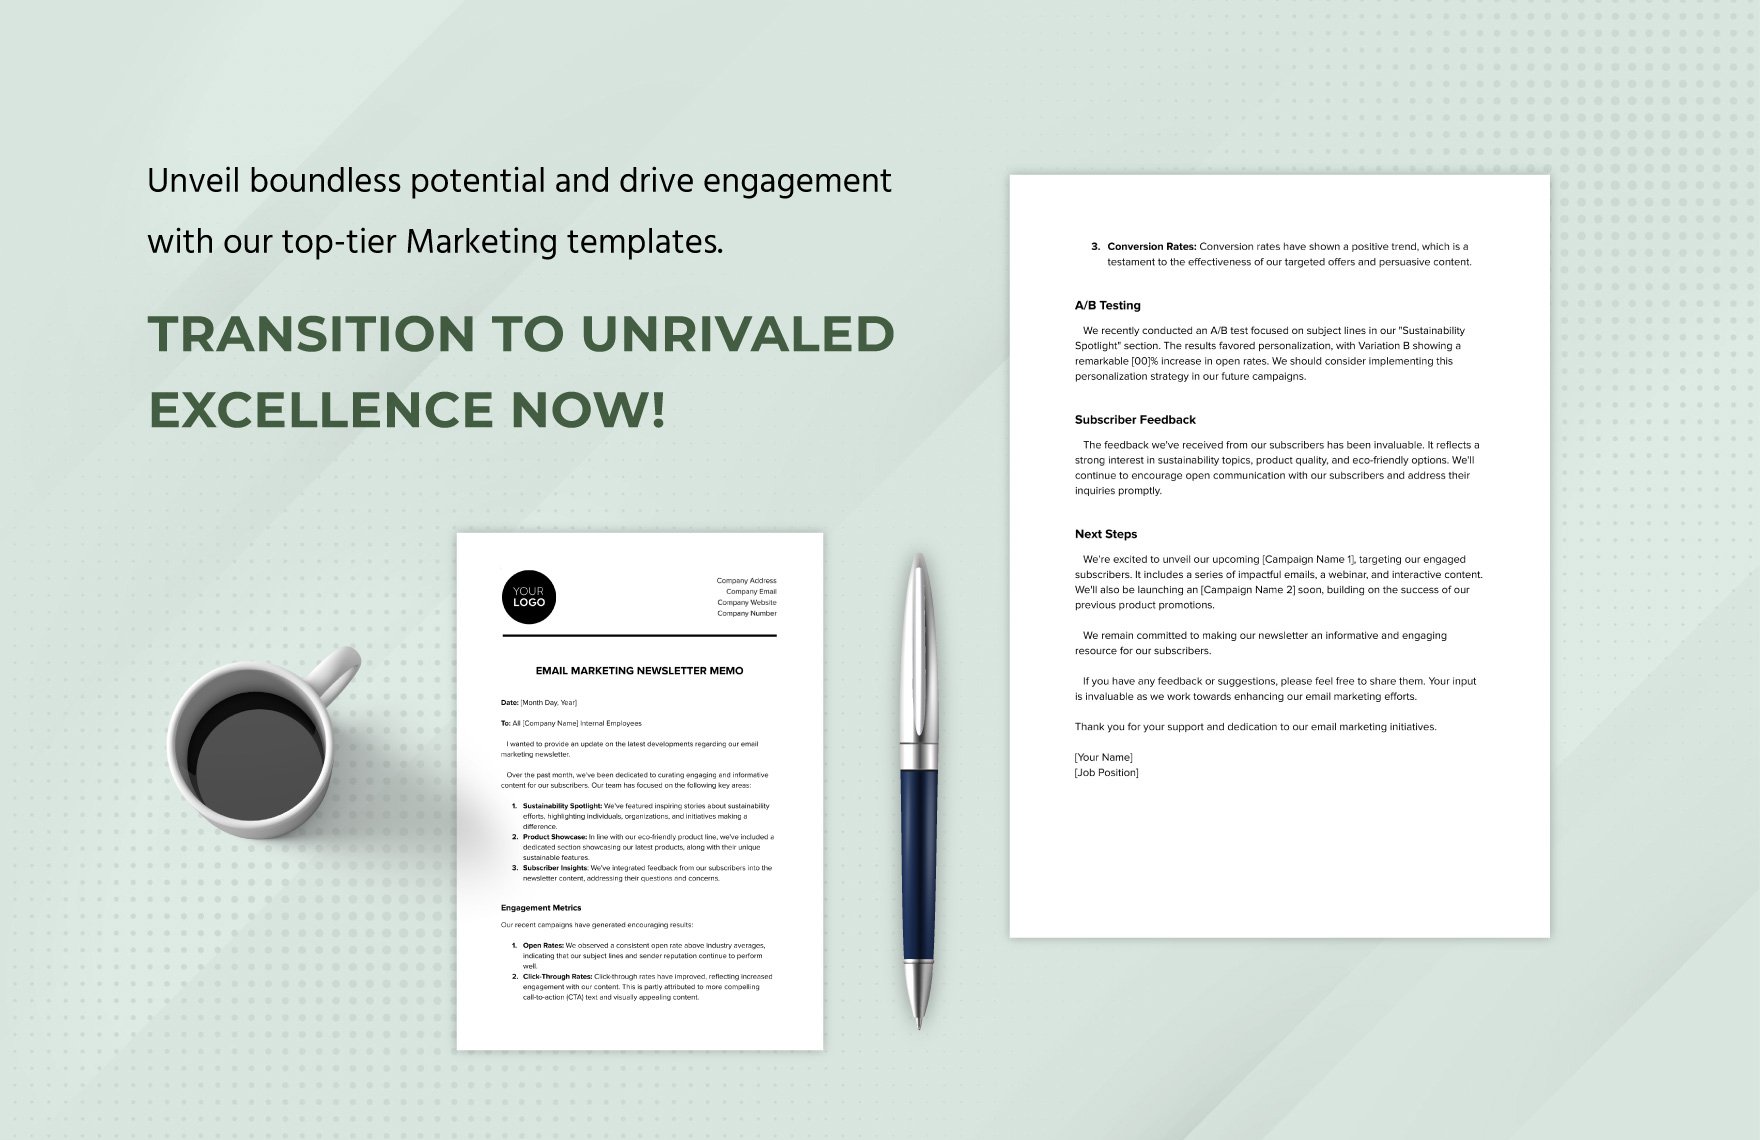 Email Marketing Newsletter Memo Template